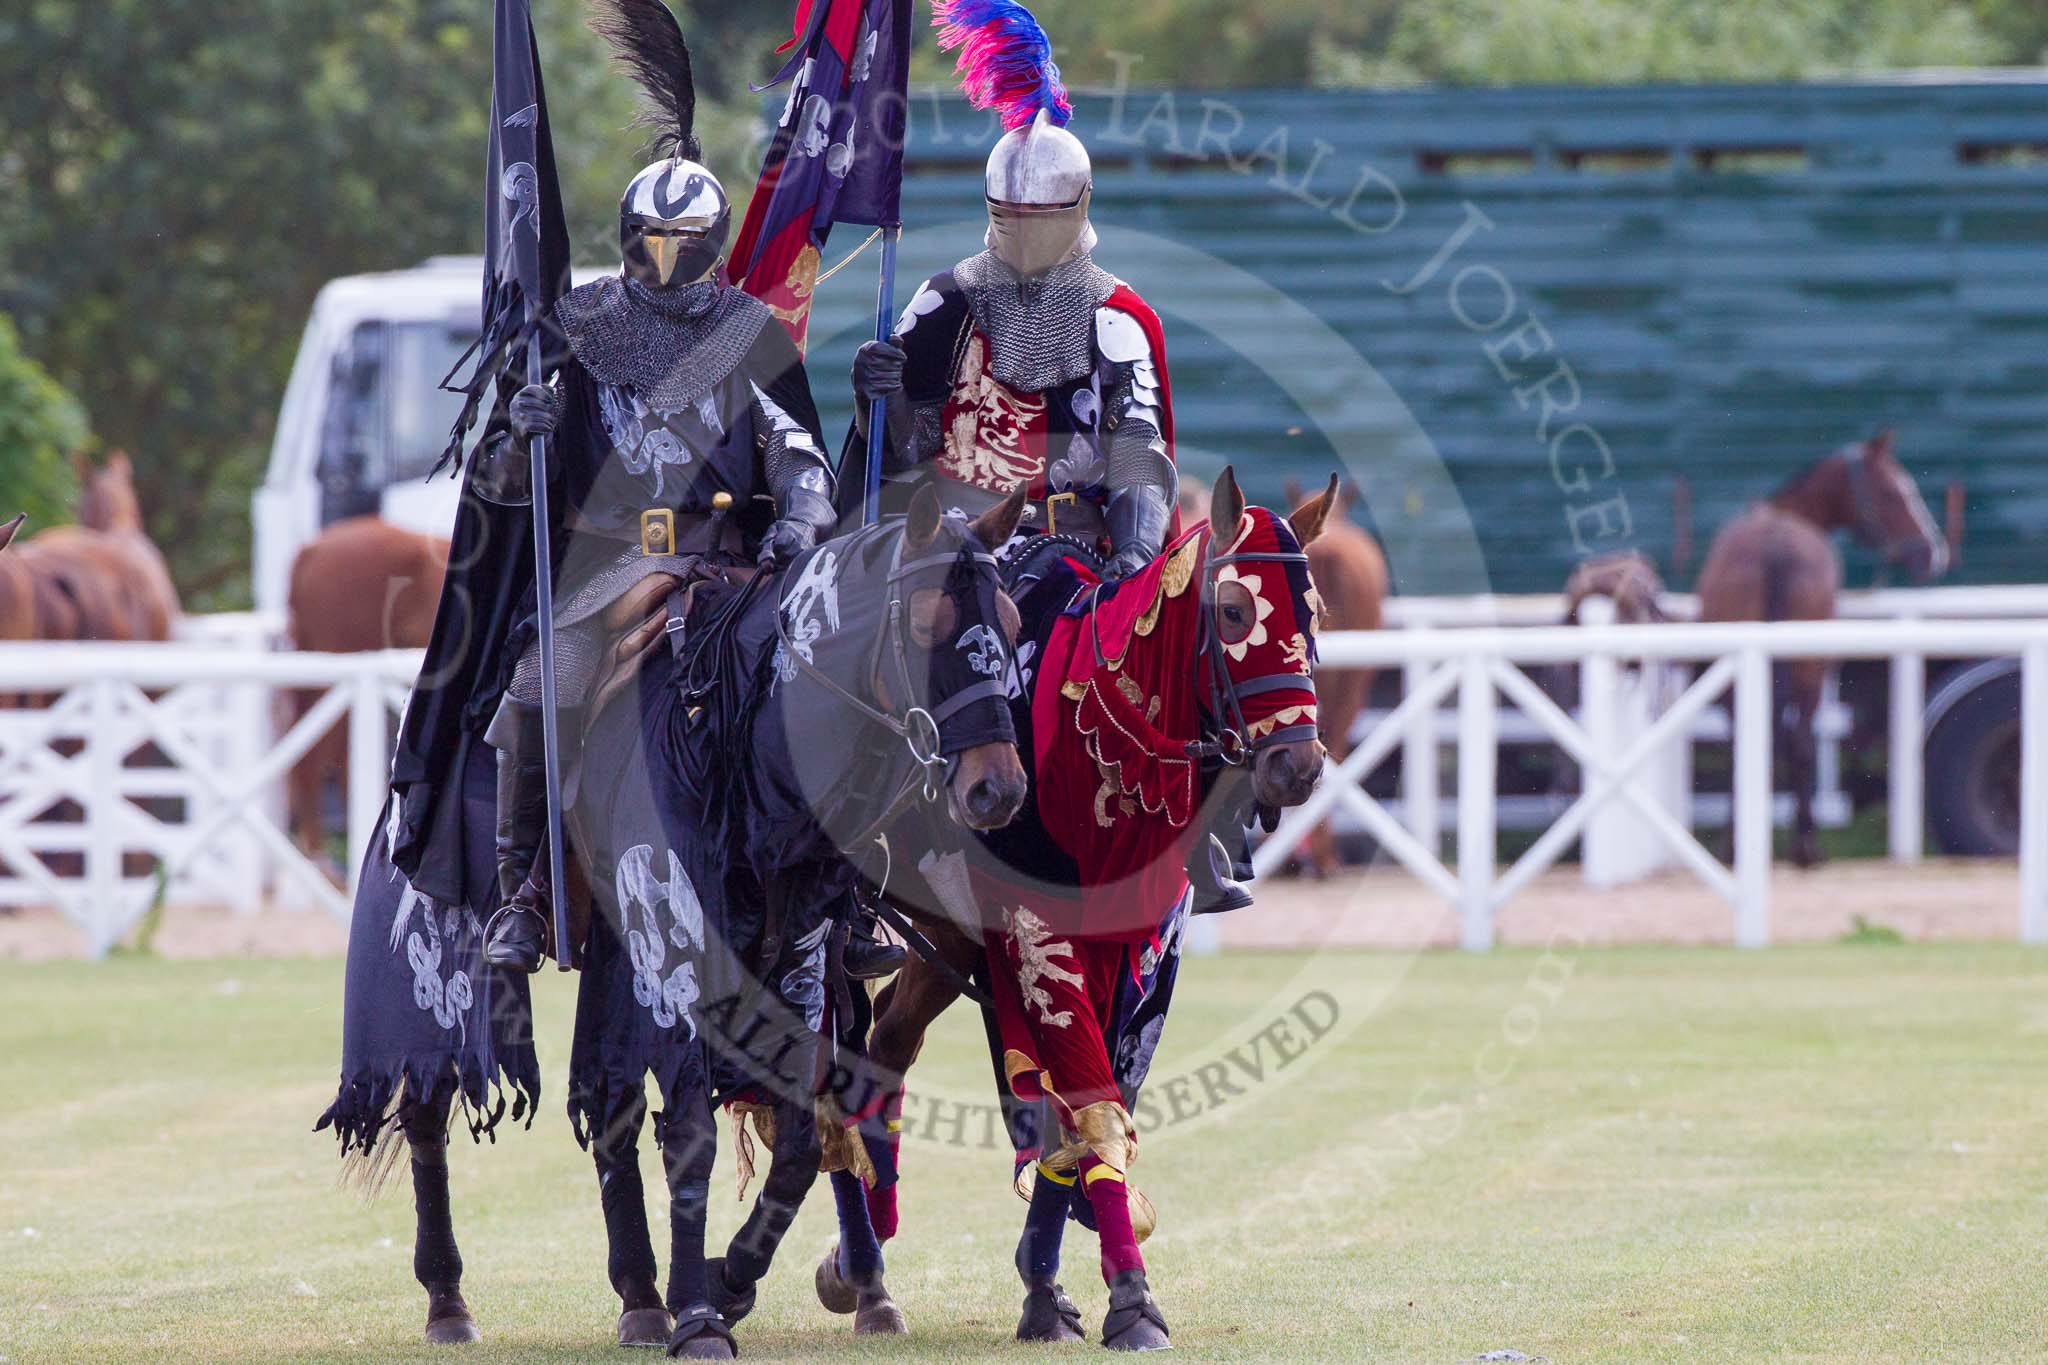 DBPC Polo in the Park 2013 - jousting display by the Knights of Middle England.
Dallas Burston Polo Club, ,
Southam,
Warwickshire,
United Kingdom,
on 01 September 2013 at 15:18, image #439